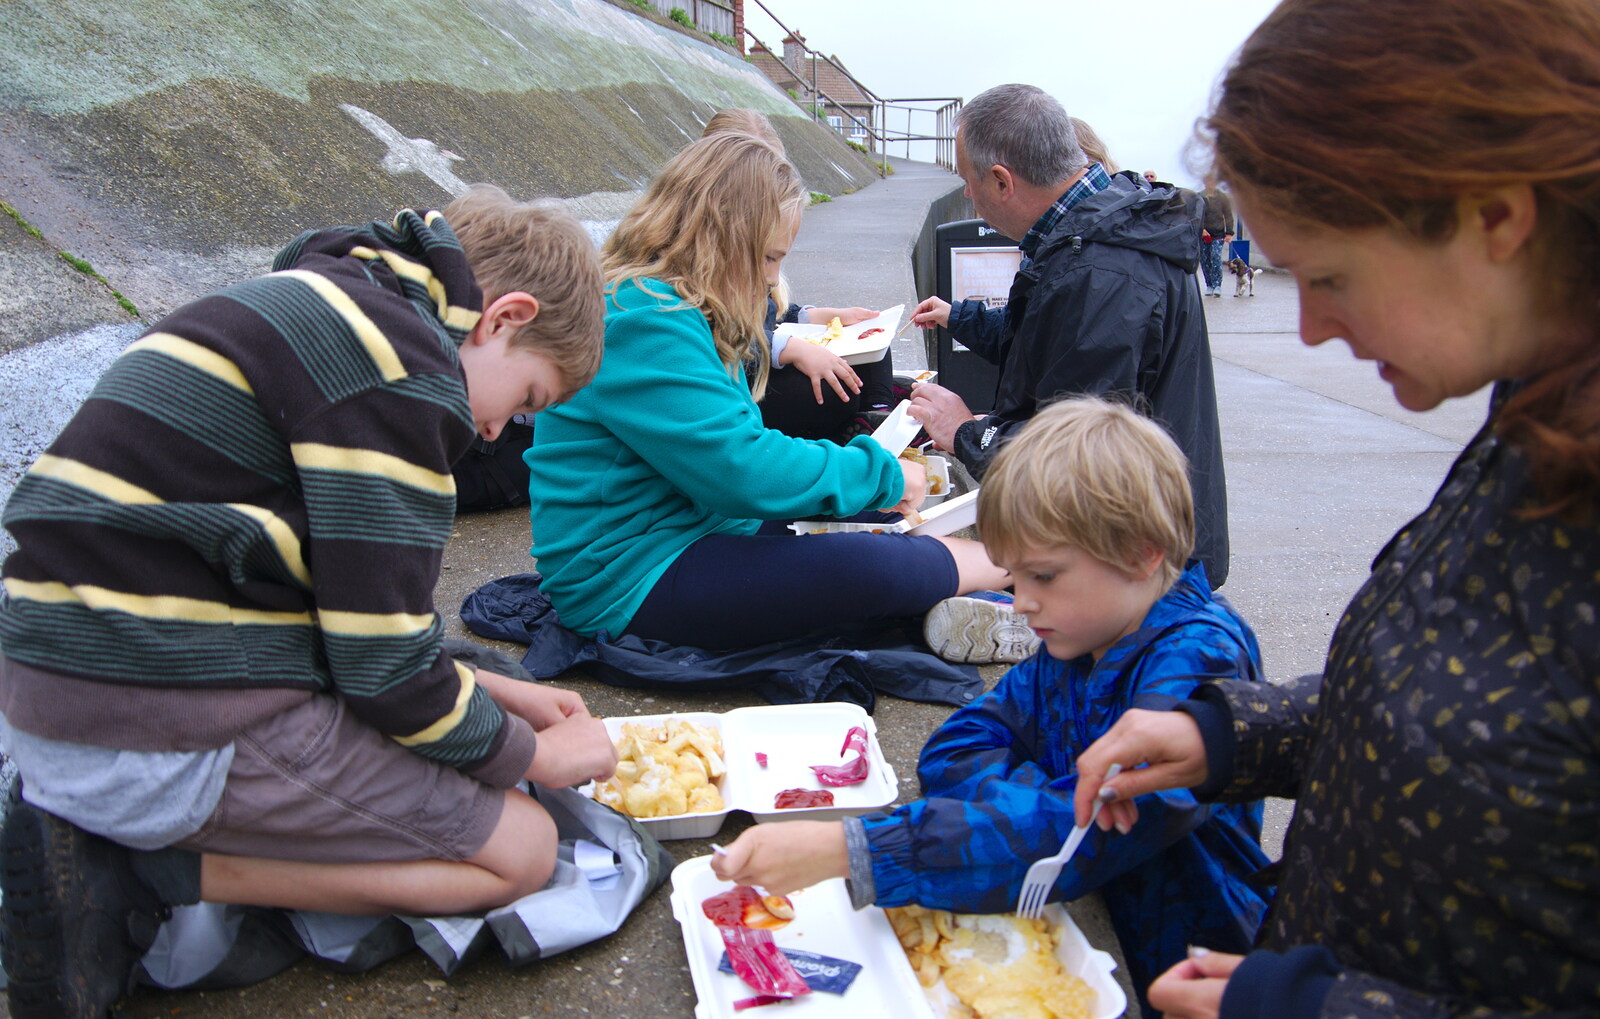 We have fish and chips down on the promenade from Kelling Camping and the Potty Morris Festival, Sheringham, North Norfolk - 6th July 2019